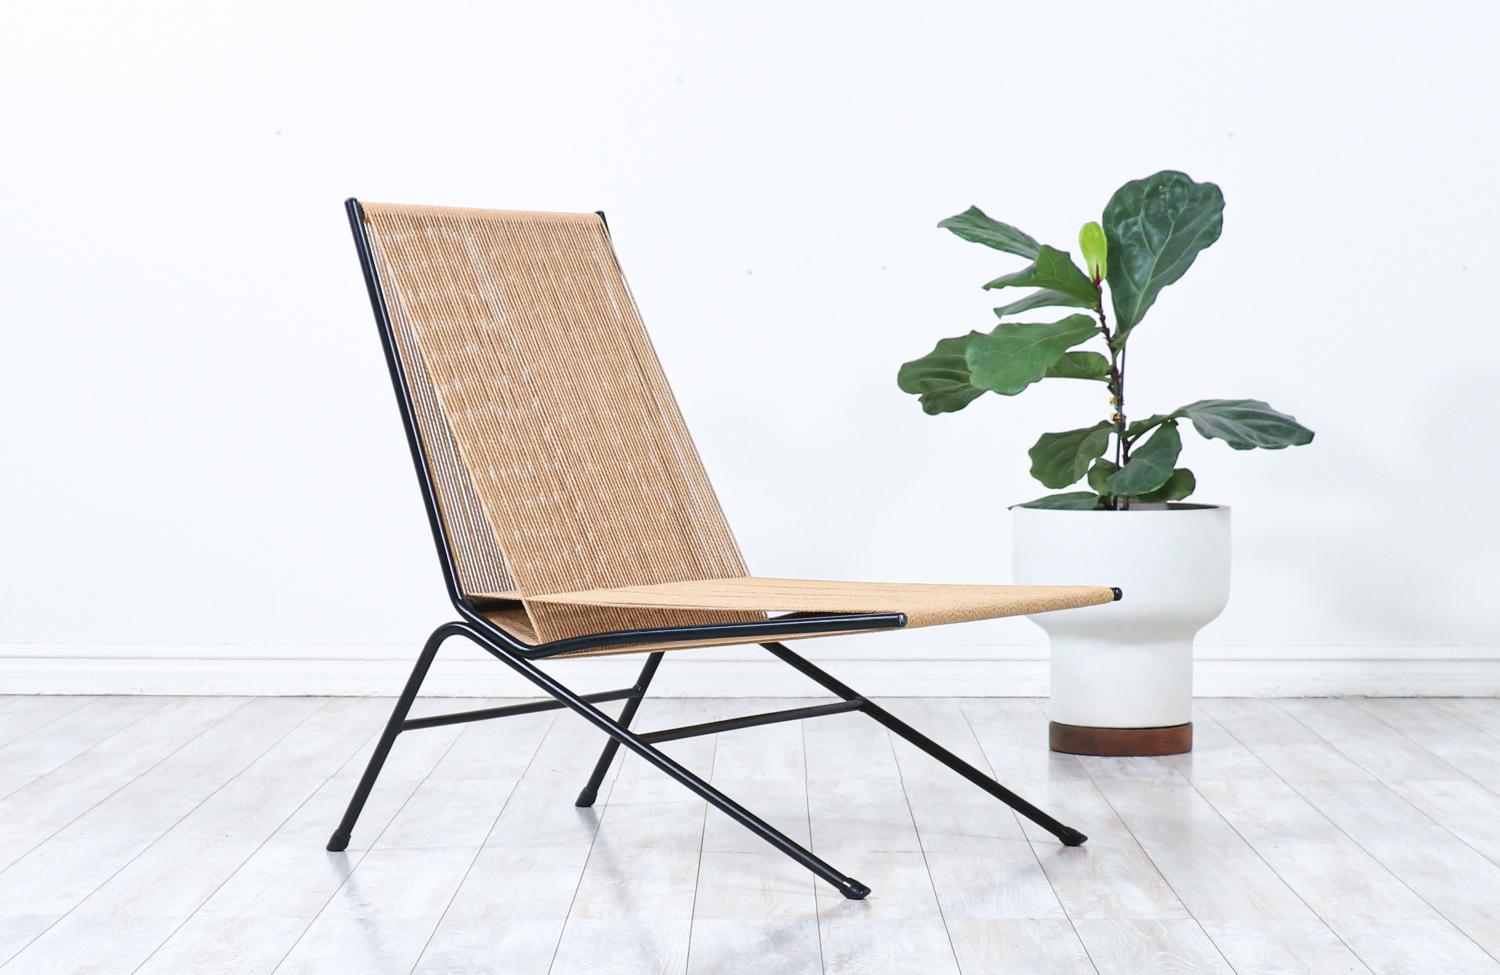 Allan Gould string lounge chair for Functional Furniture.

________________________________________

Transforming a piece of Mid-Century Modern furniture is like bringing history back to life, and we take this journey with passion and precision.